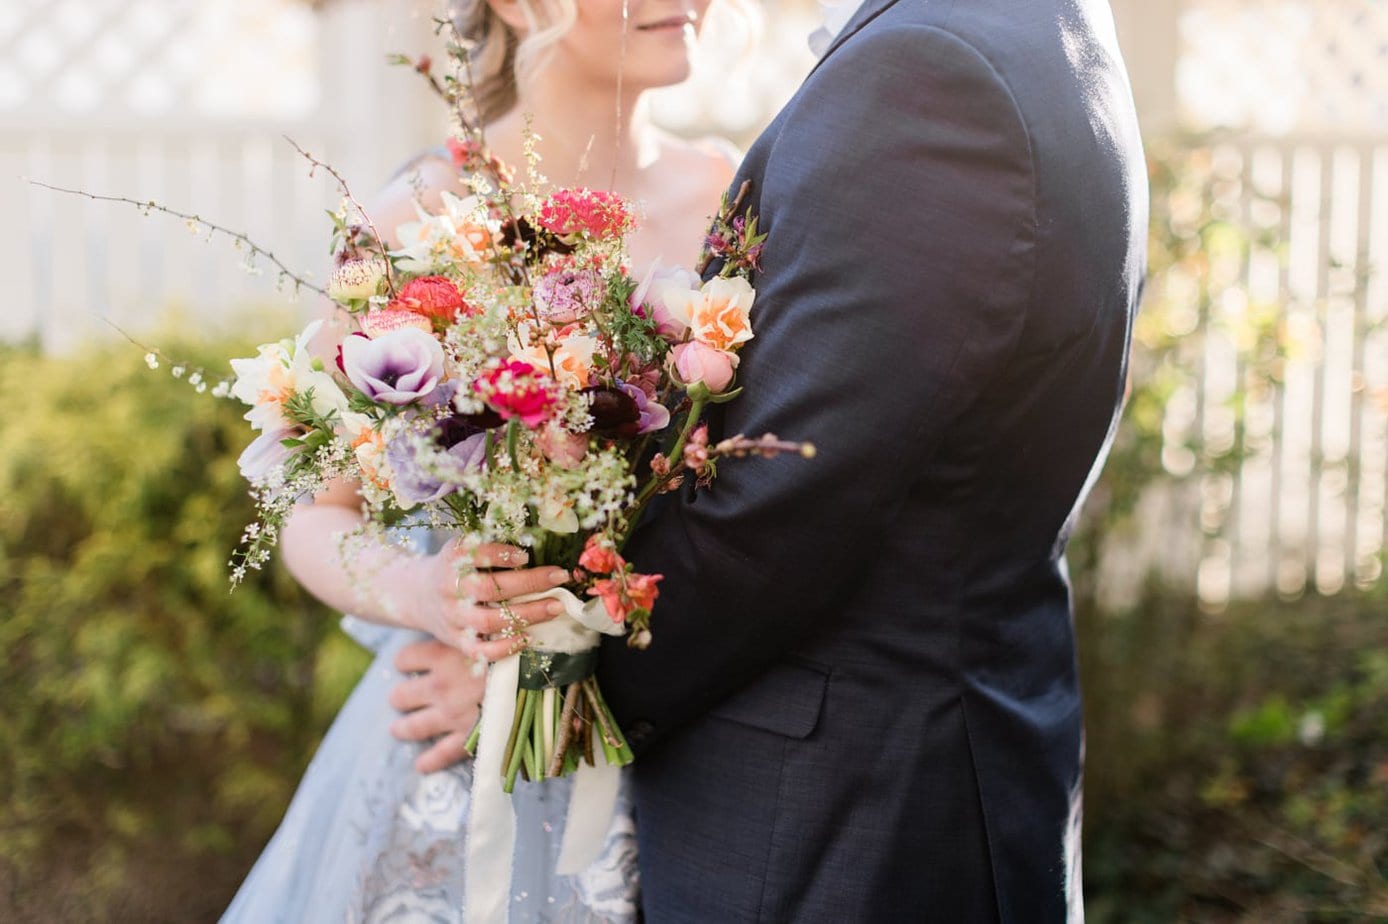 A couple look at each other during a romantic garden wedding editorial shoot in downtown Roanoke. The bride is wearing a blue dress and is holding a colorful boho bouquet